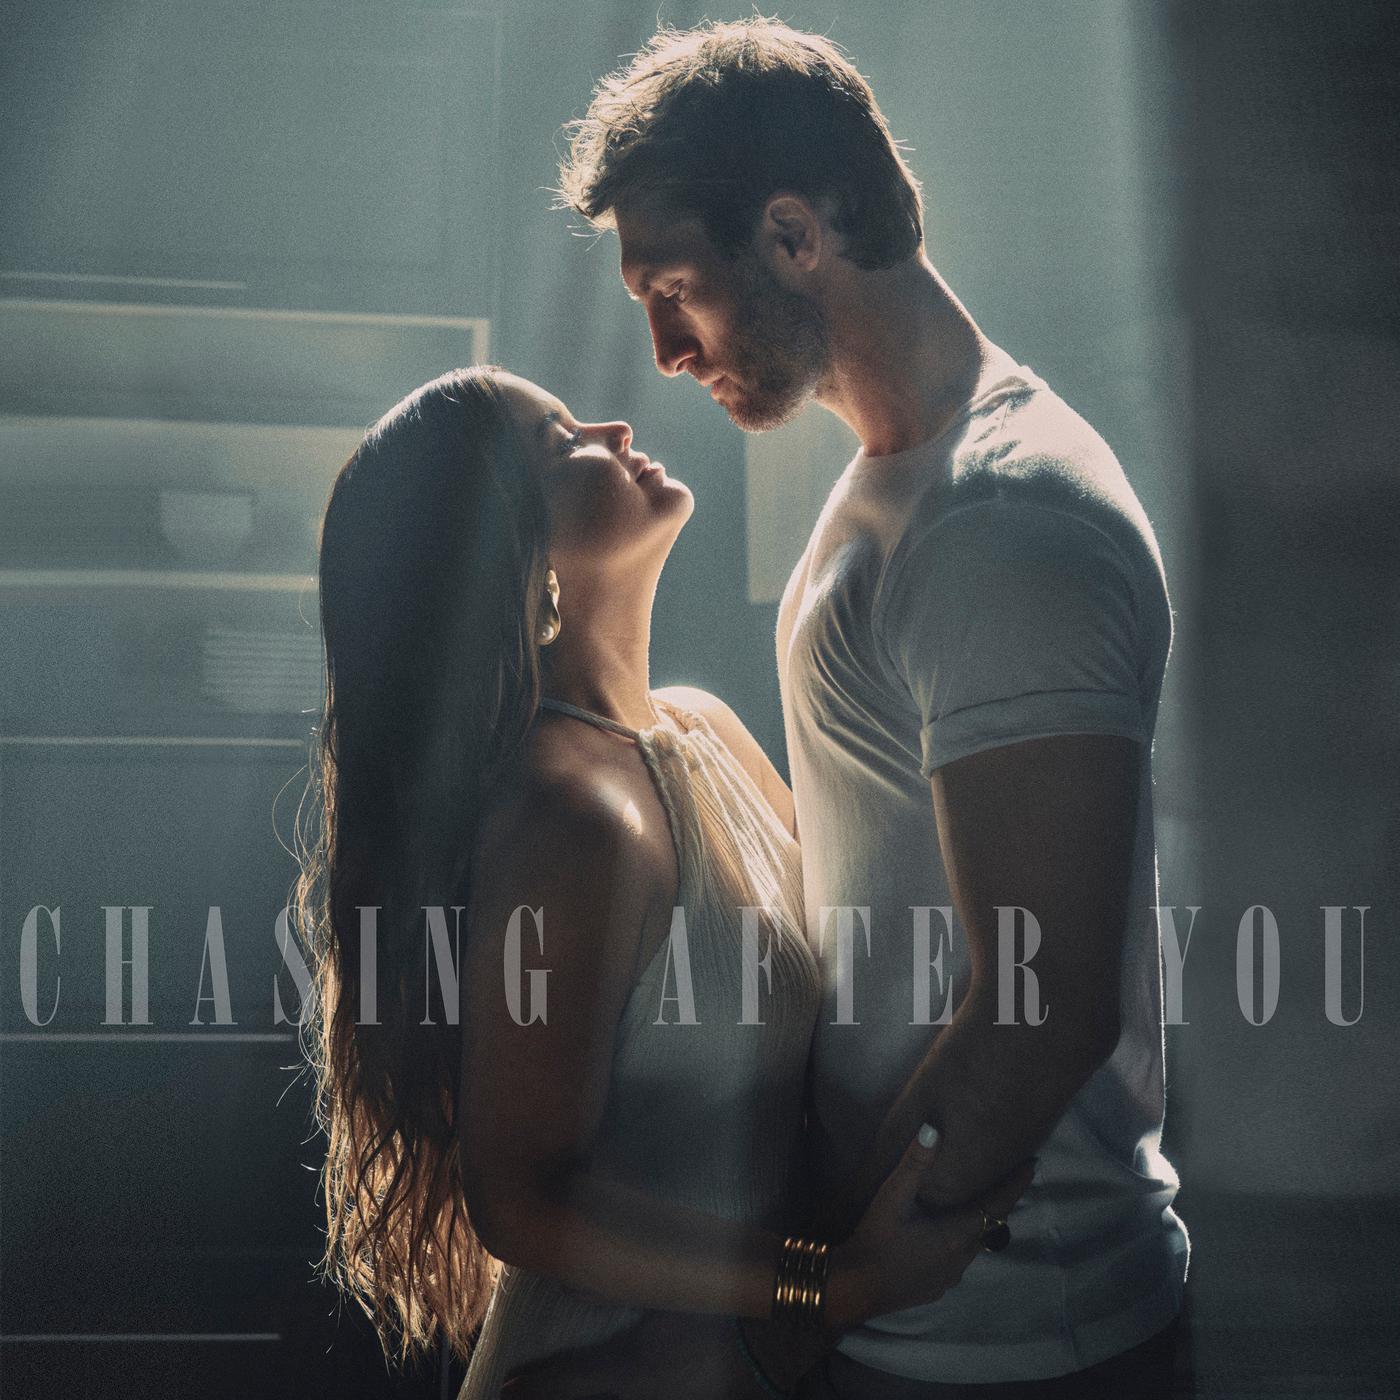 Chasing After You歌词 歌手Ryan Hurd / Maren Morris-专辑Chasing After You-单曲《Chasing After You》LRC歌词下载